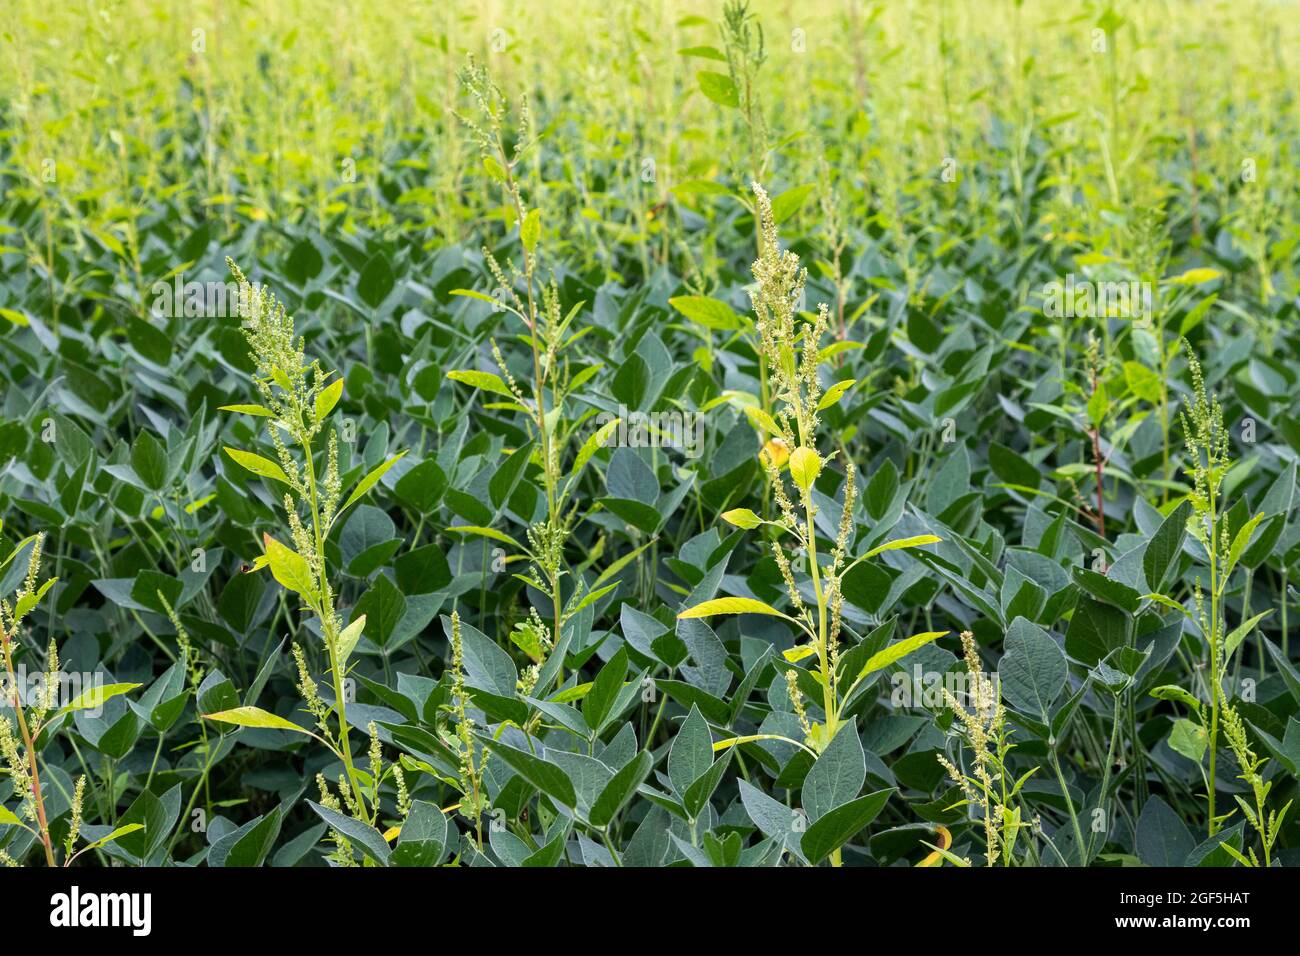 Three Oaks, Michigan - An herbicide-resistant weed, Palmer amaranth, growing in a field of soybeans. The weed has developed resistance to the most pow Stock Photo